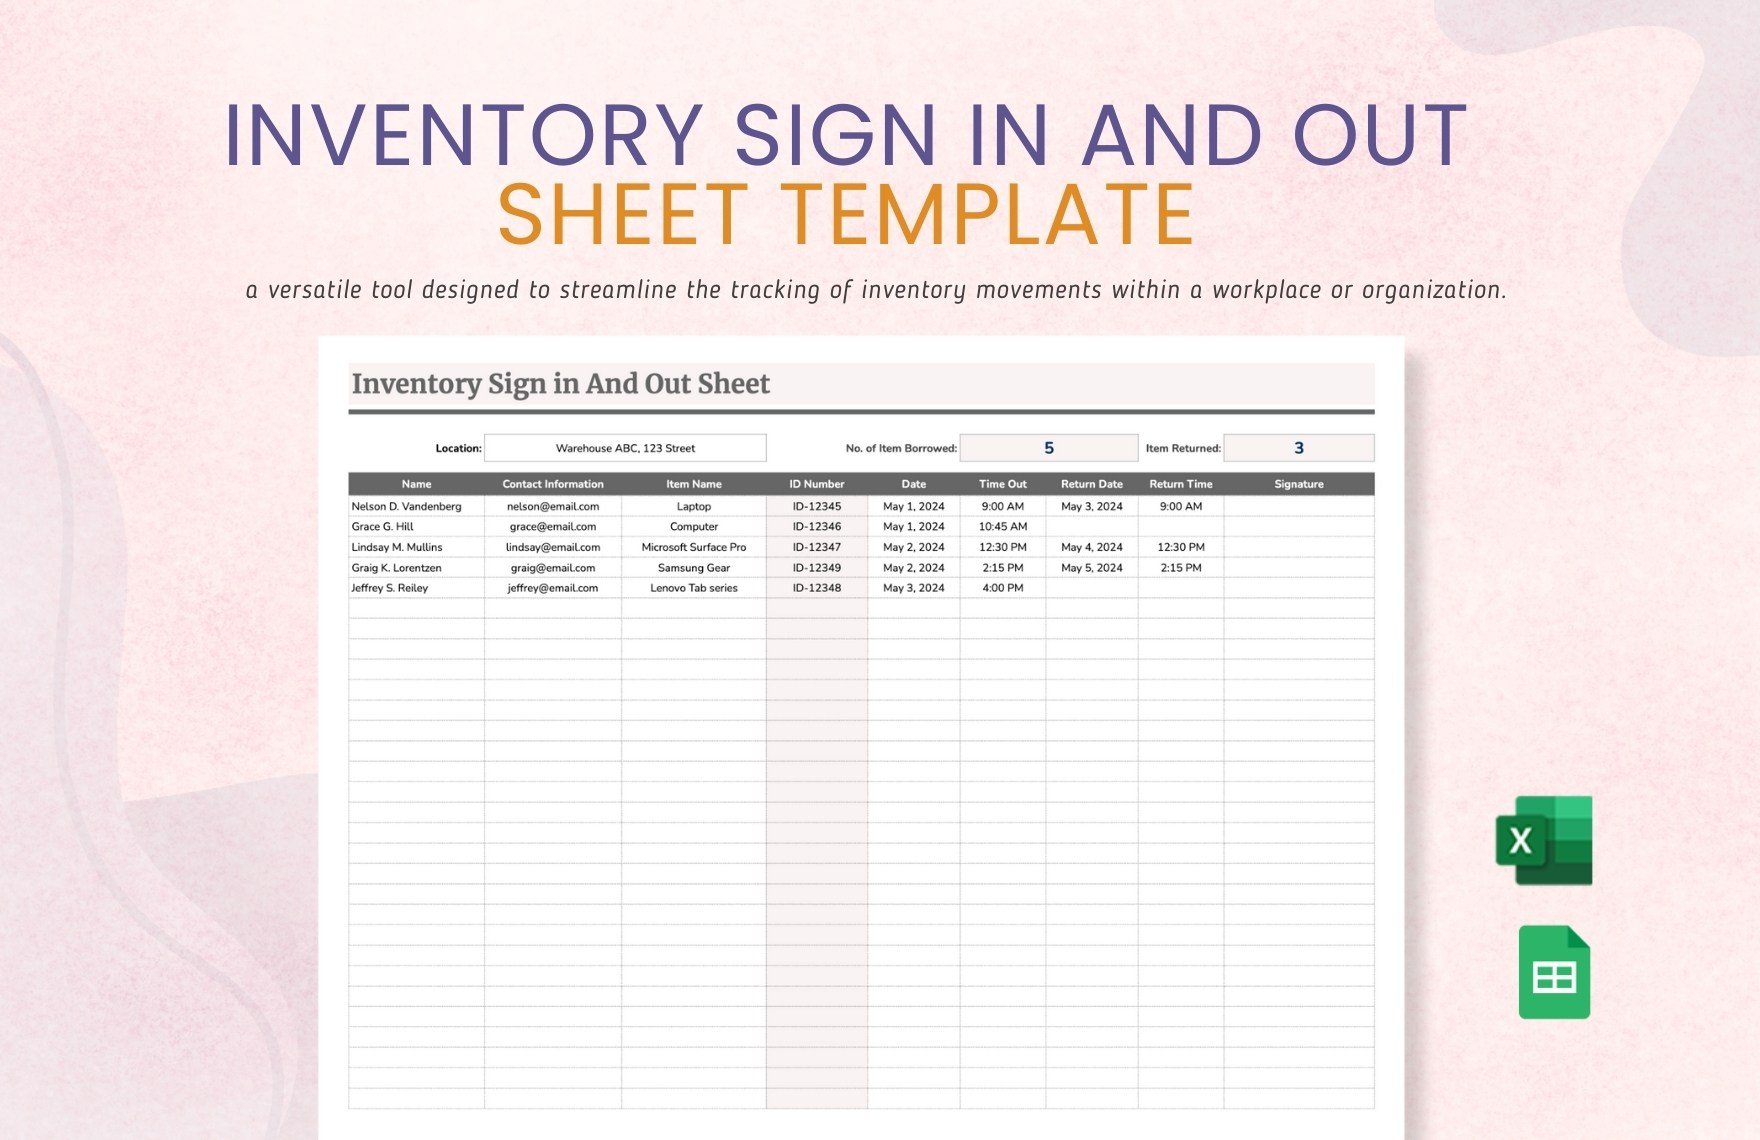 Inventory Sign in And Out Sheet Template in Excel, Google Sheets